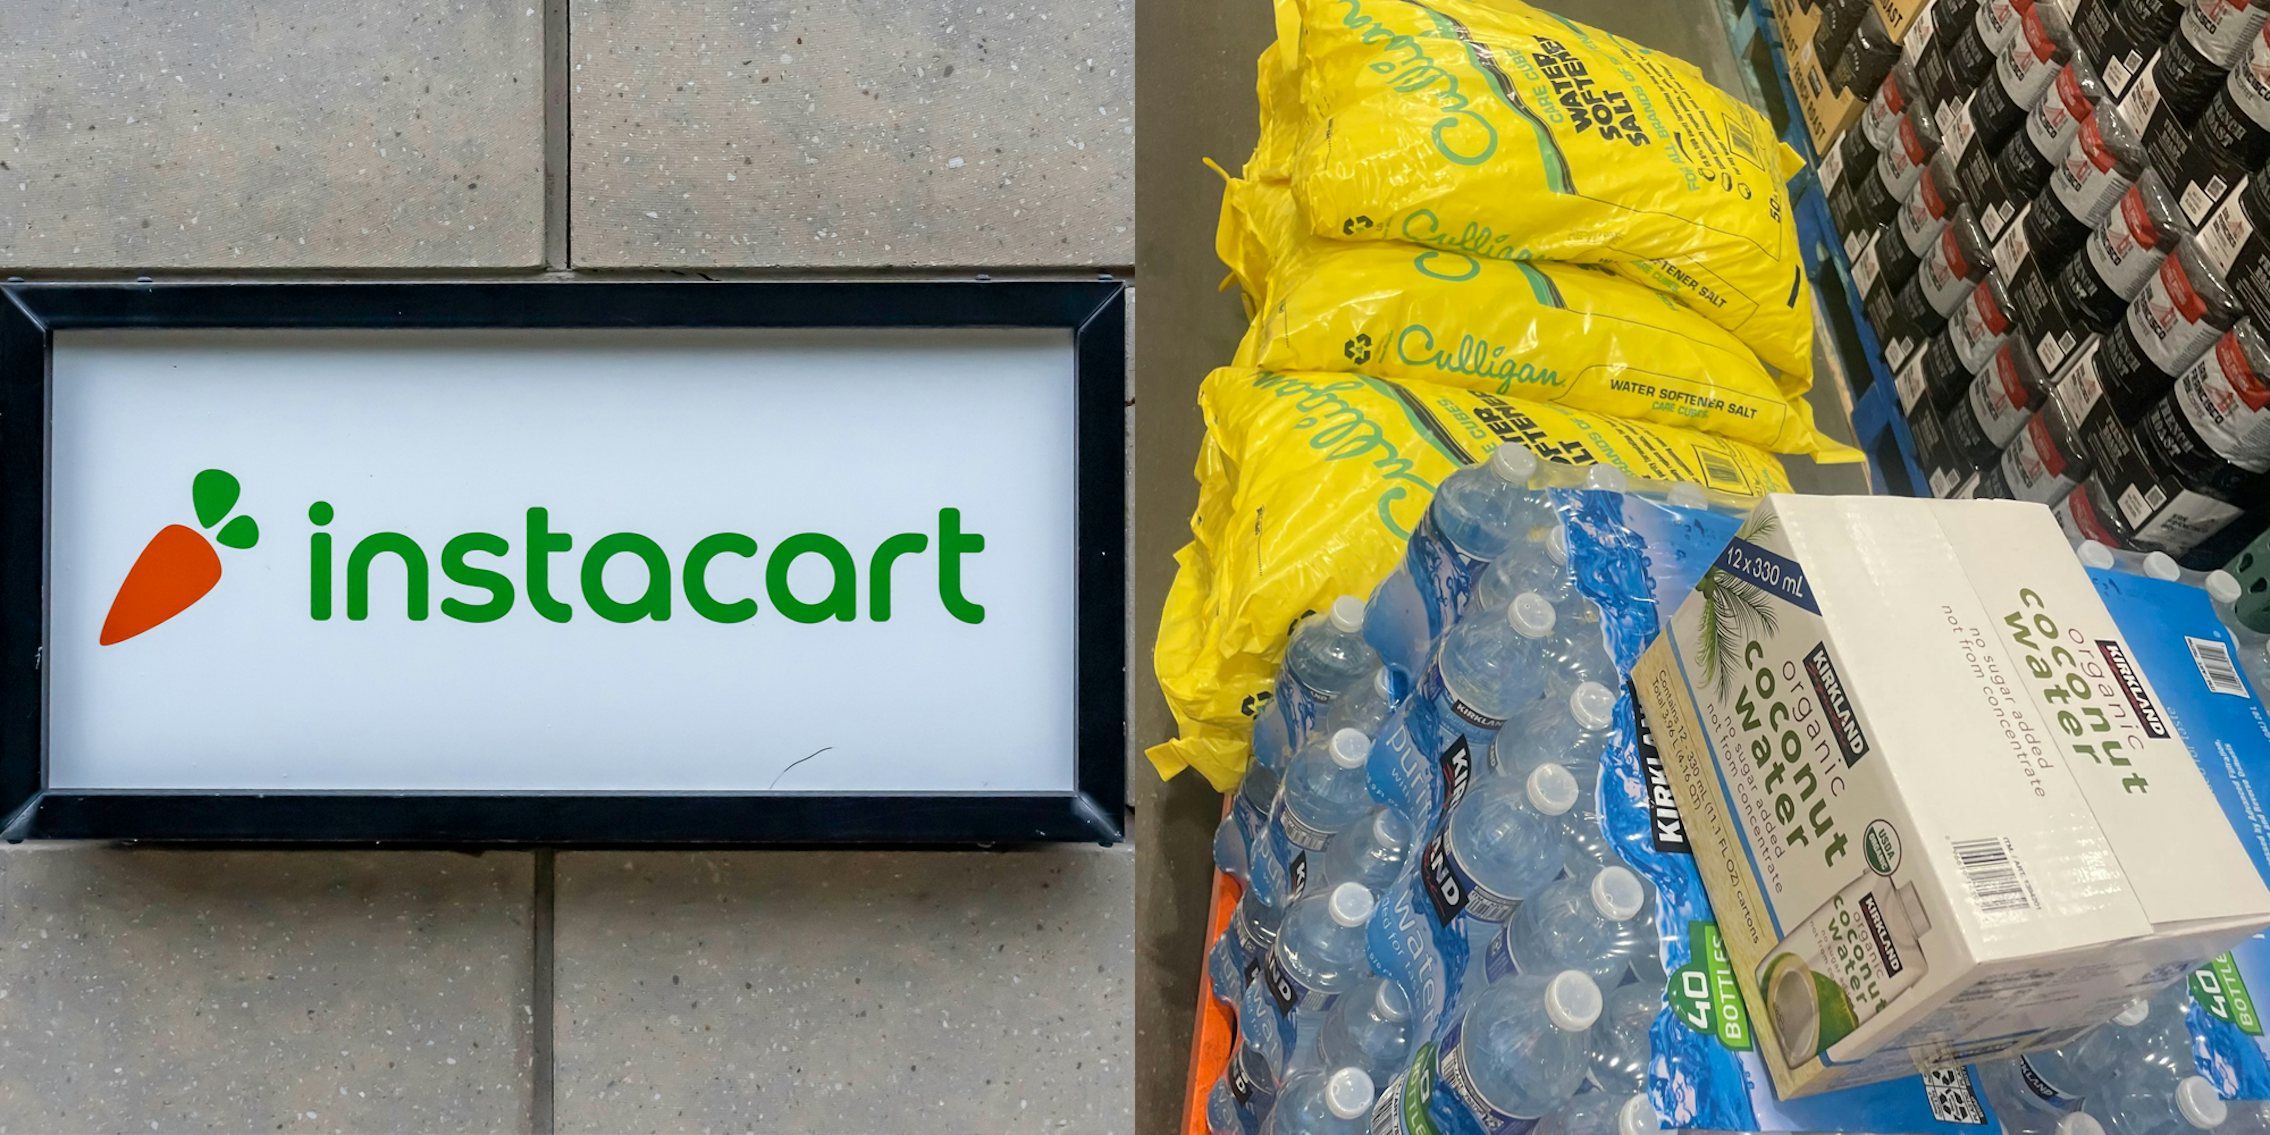 instacart logo (l) culligan water softener salt bags and a pallet of water bottles (r)